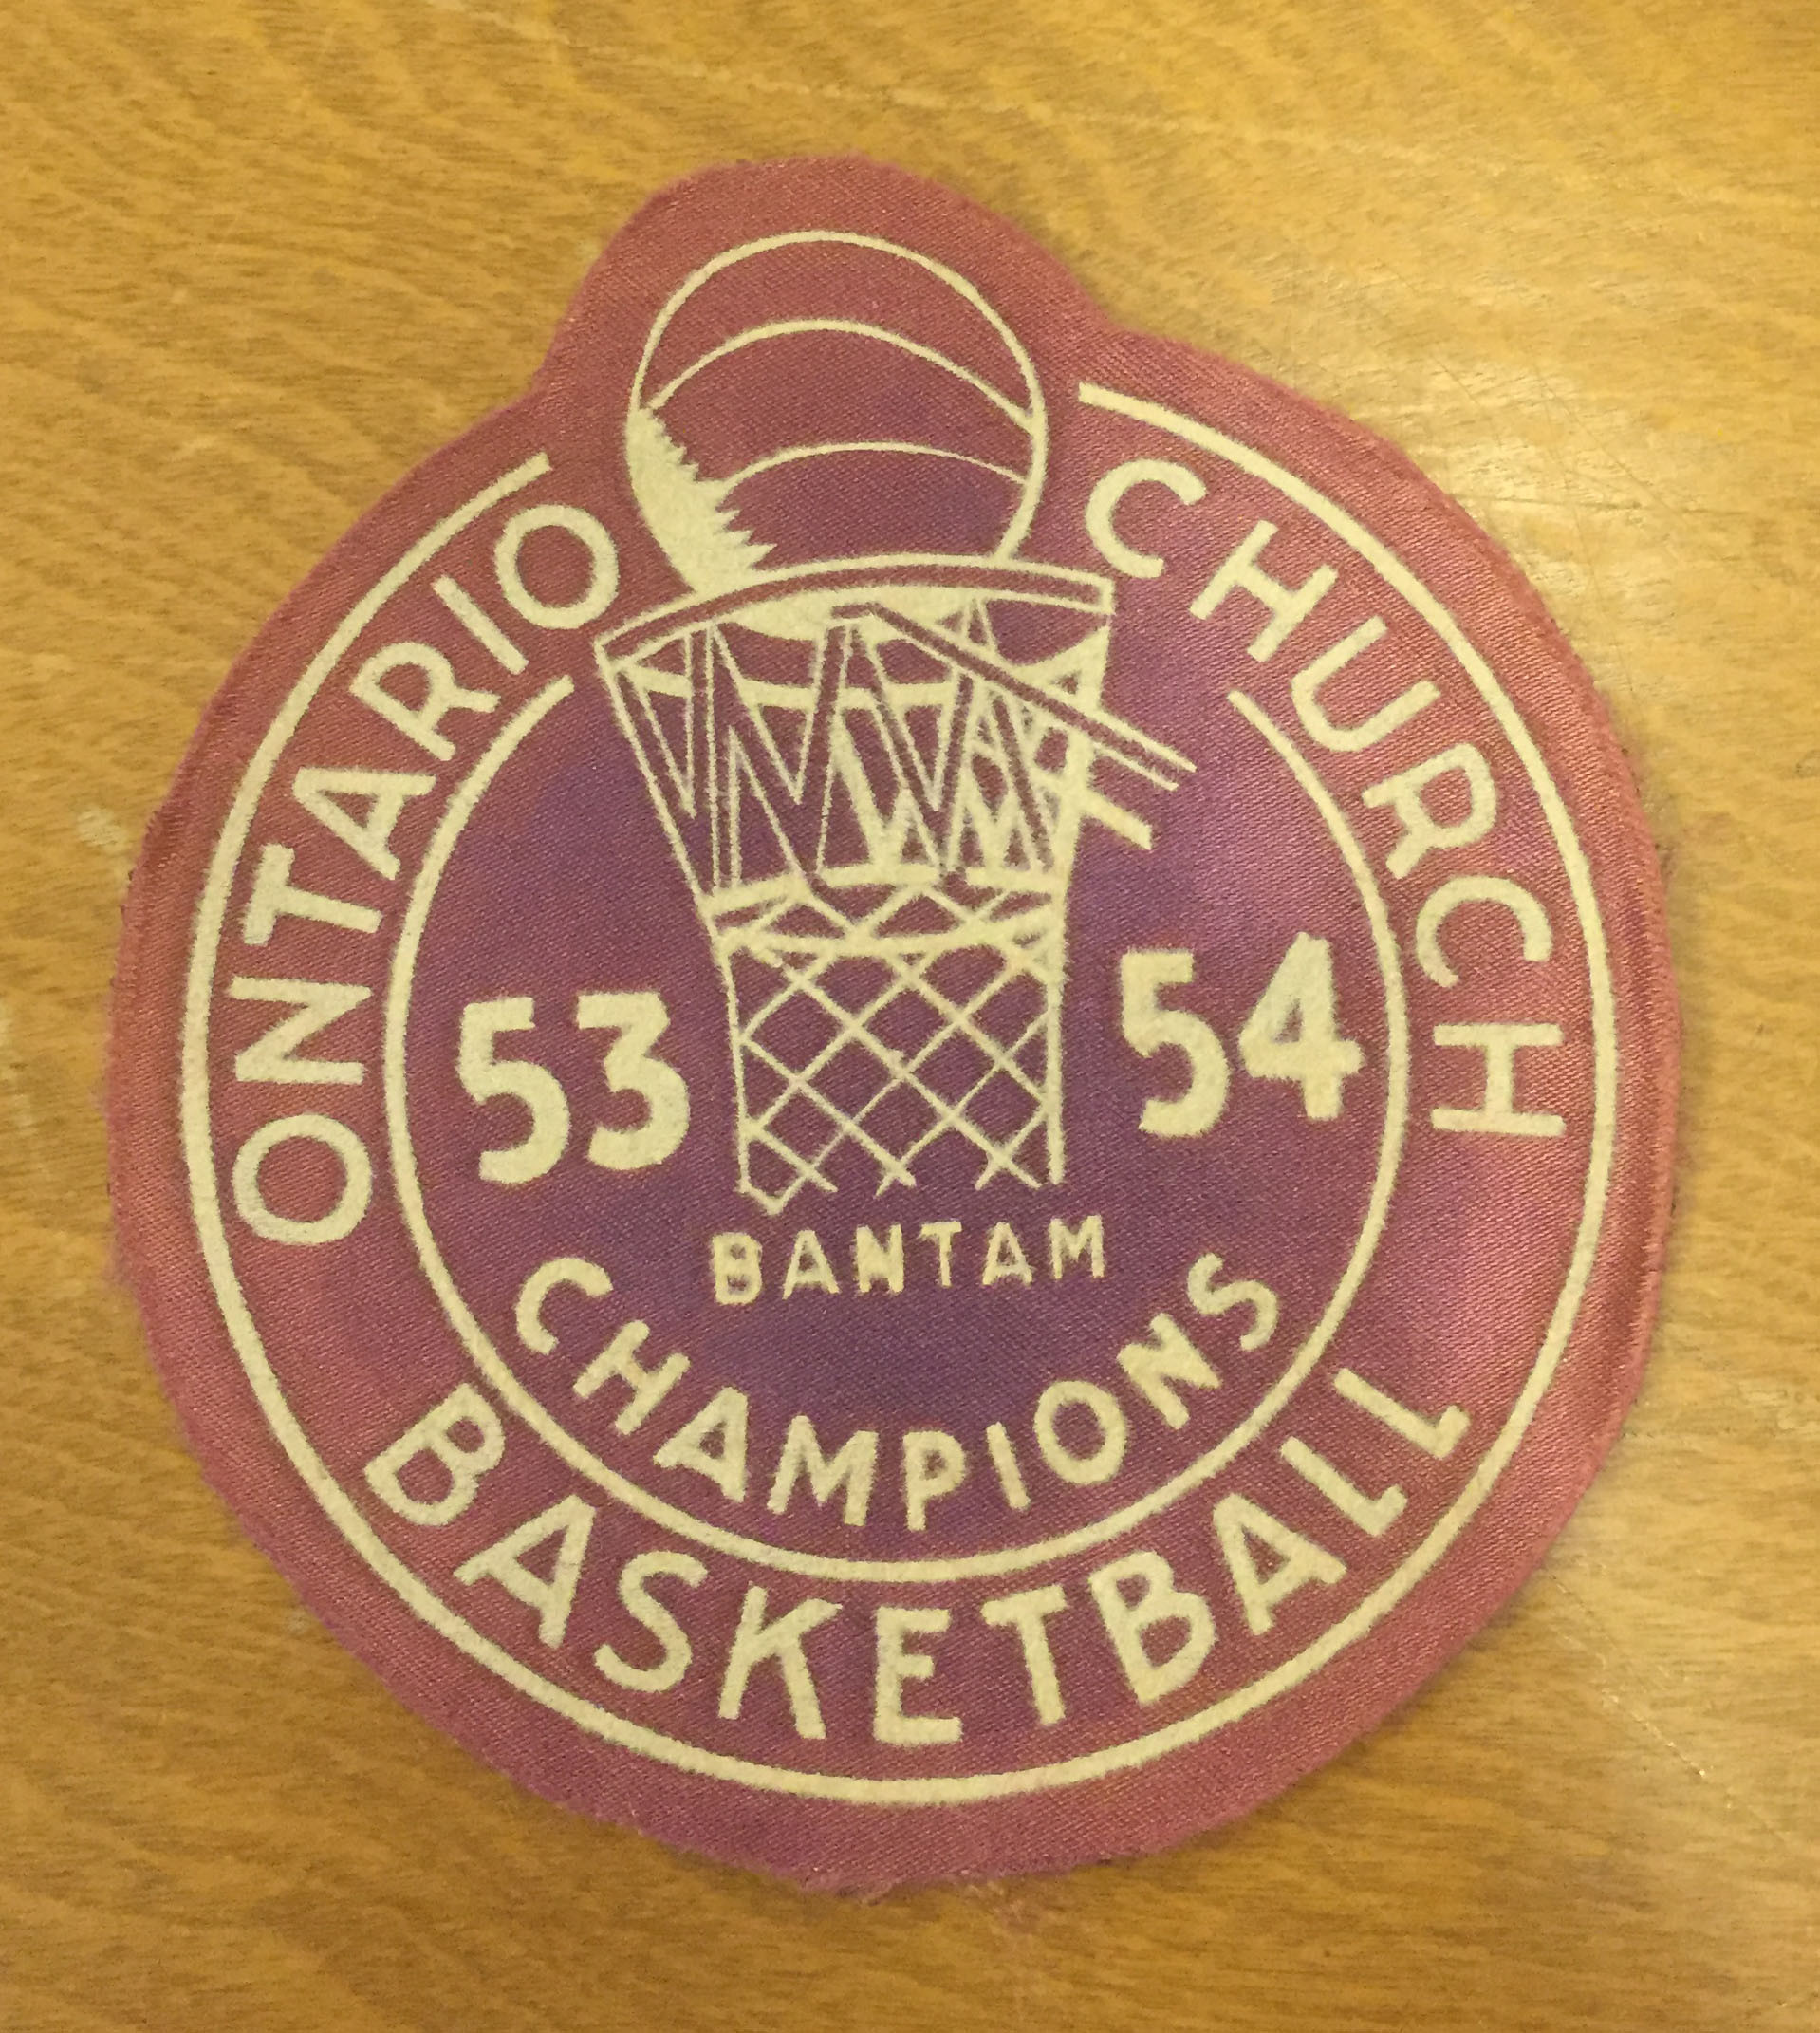 colour%20photo%20of%20St.%20Andrew%27s%20Church%20basketball%20champions%20sports%20patch%2C%201953-54